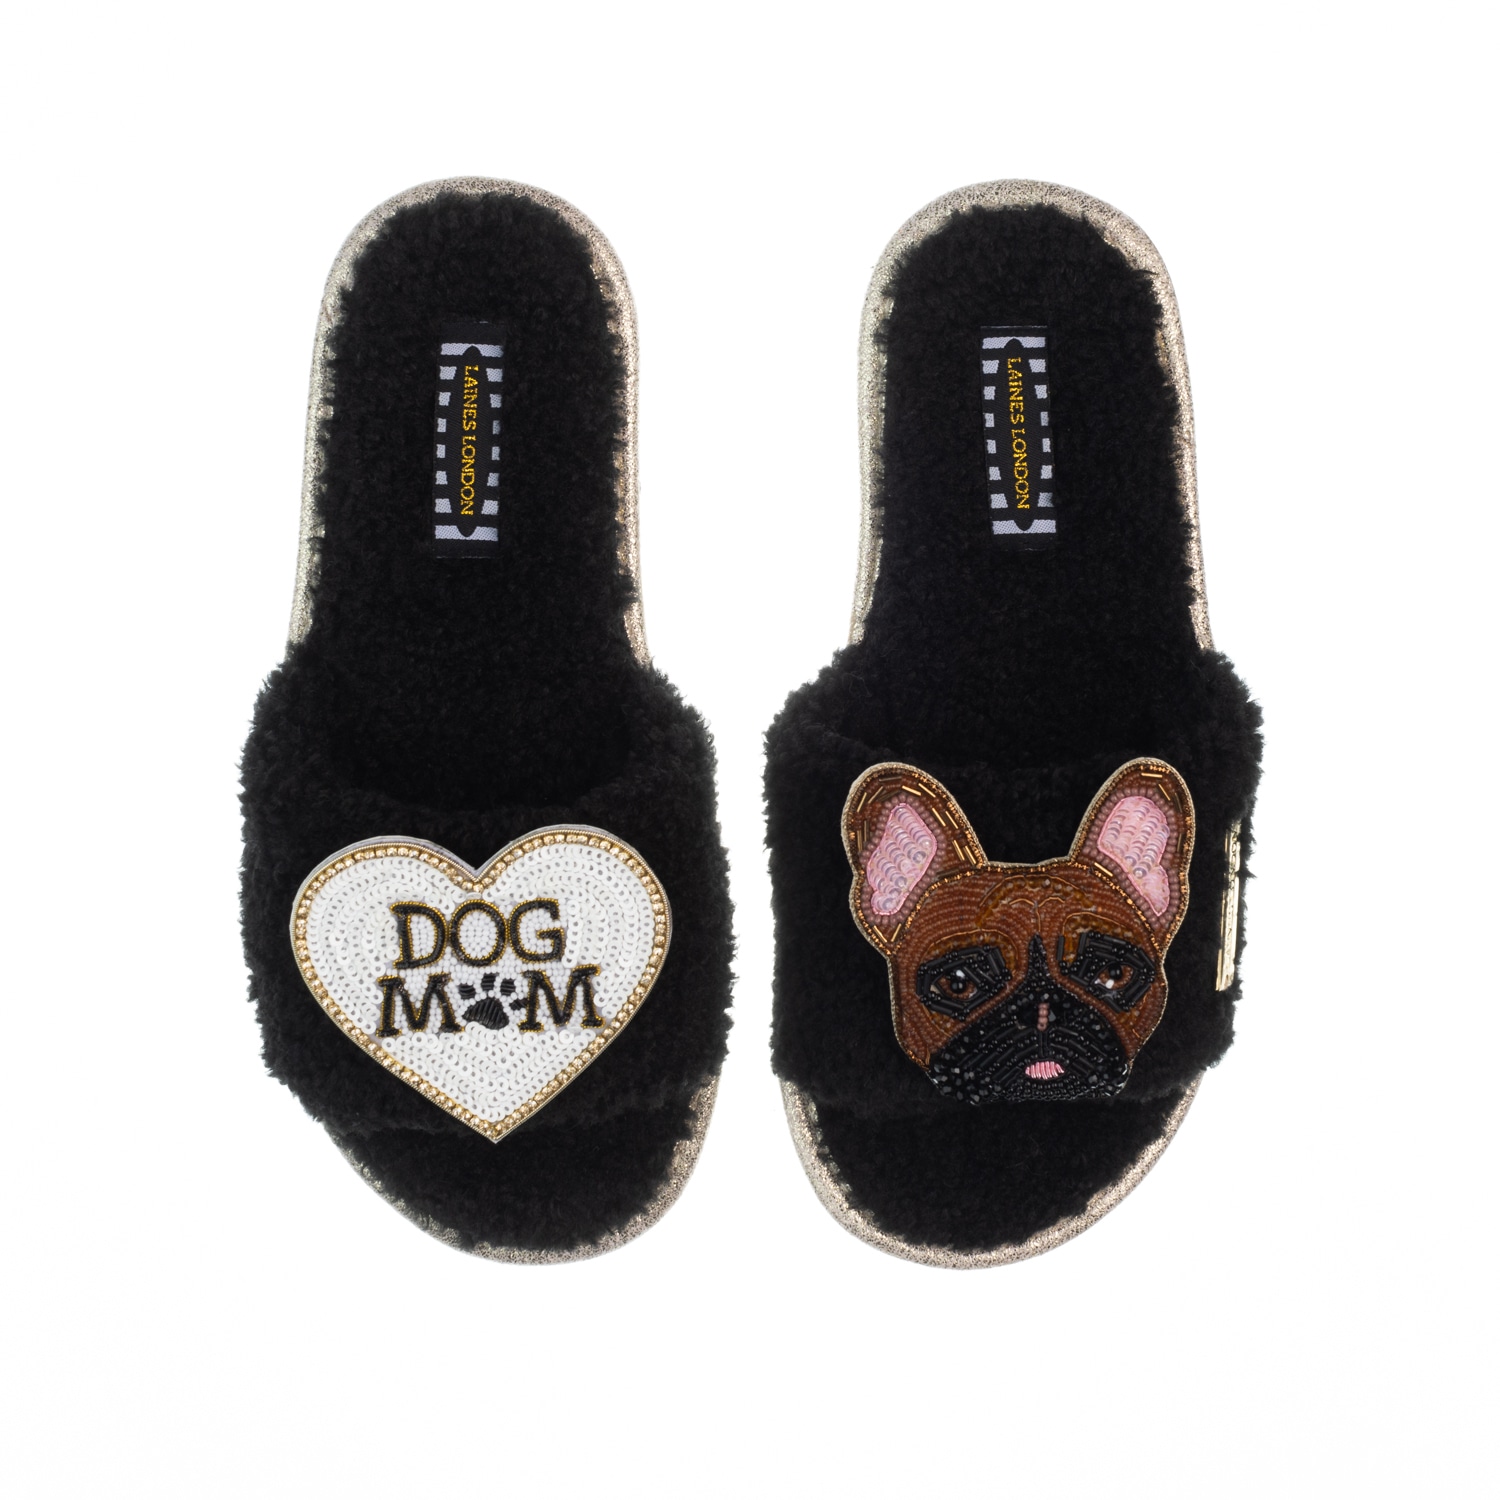 Laines London Women's Teddy Toweling Slippers With Cookie The Frenchie & Dog Mum /mom Brooches - Black